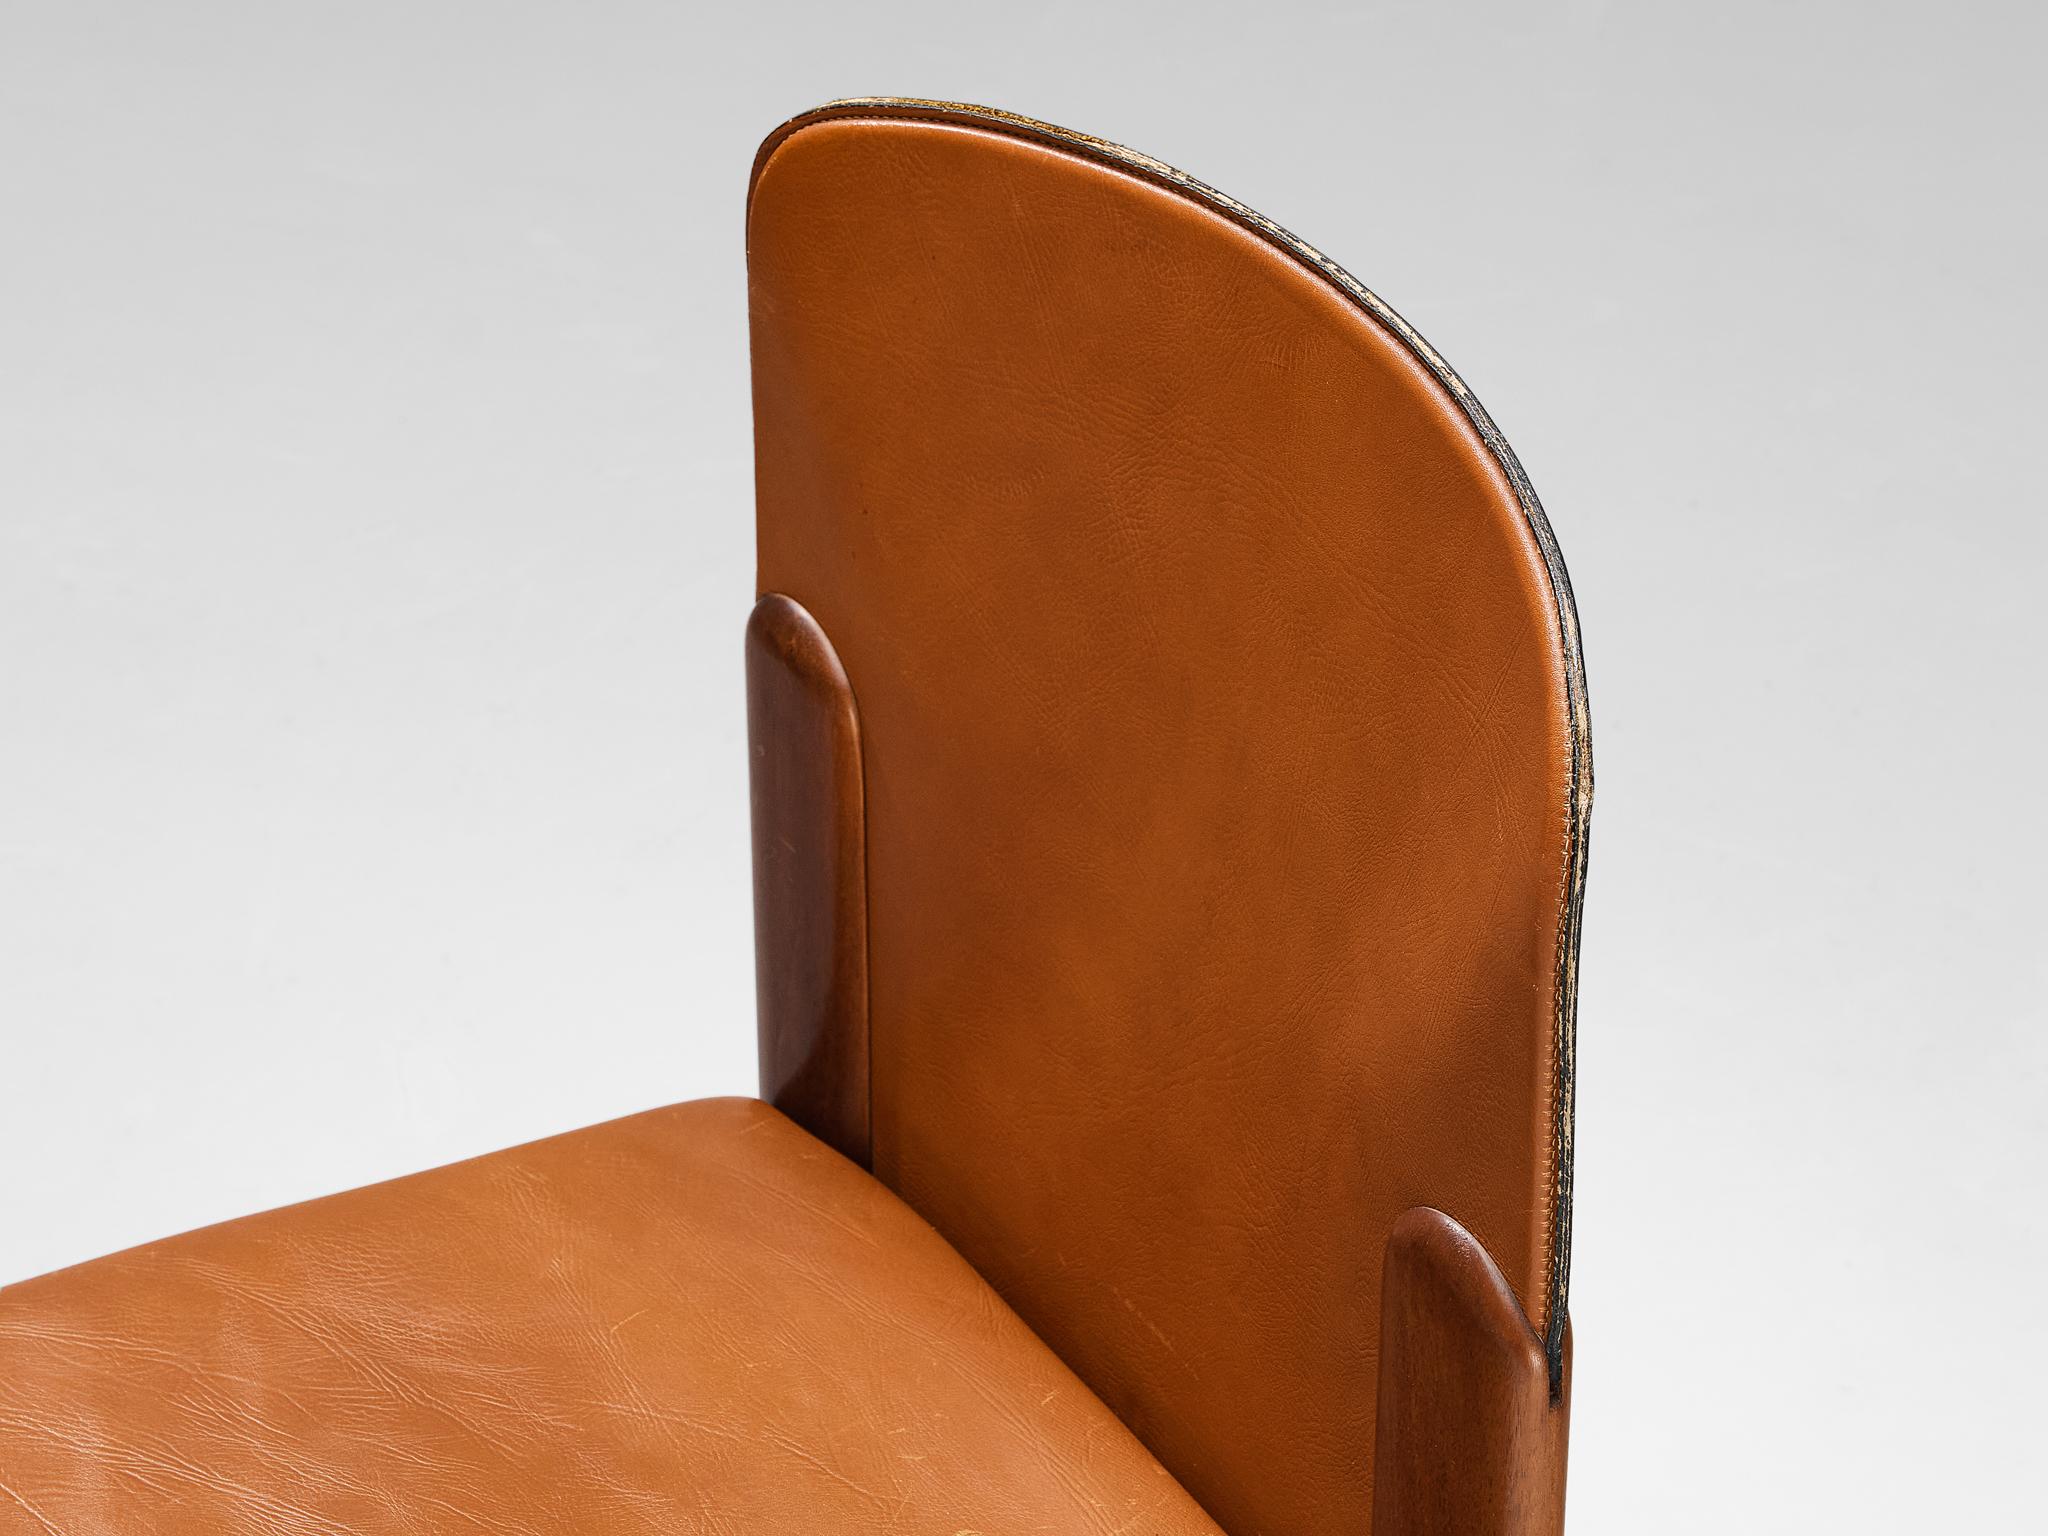 Silvio Coppola for Bernini Pair of Dining Chairs in Leather and Walnut  For Sale 1